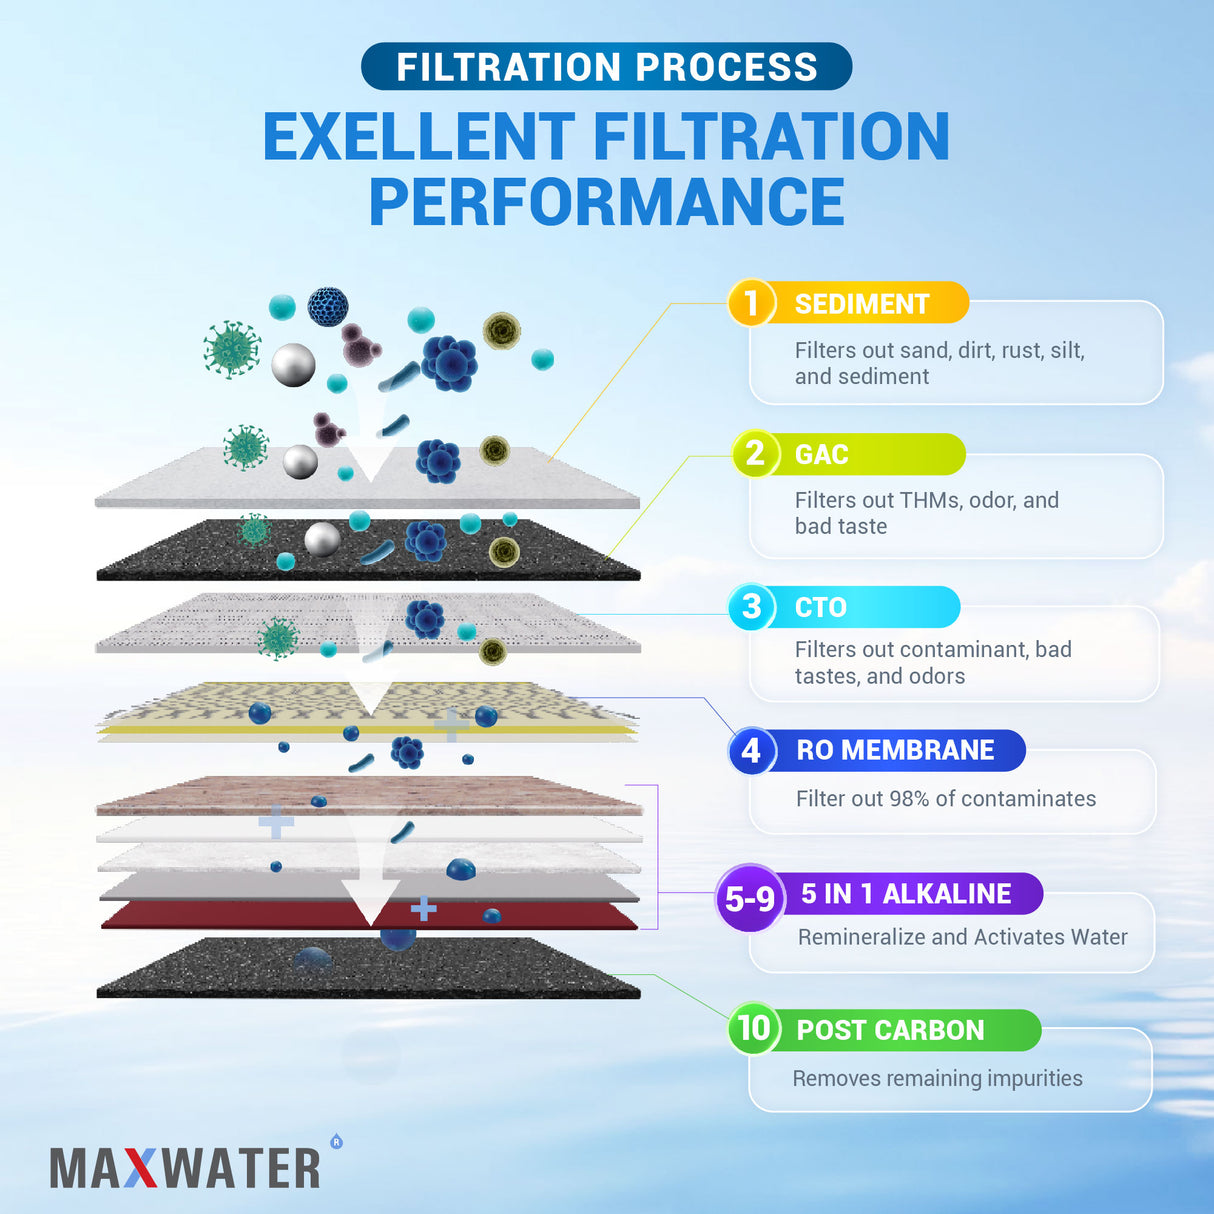 water filtration Stages for quality water - Top quality RO system from from Blue Max water